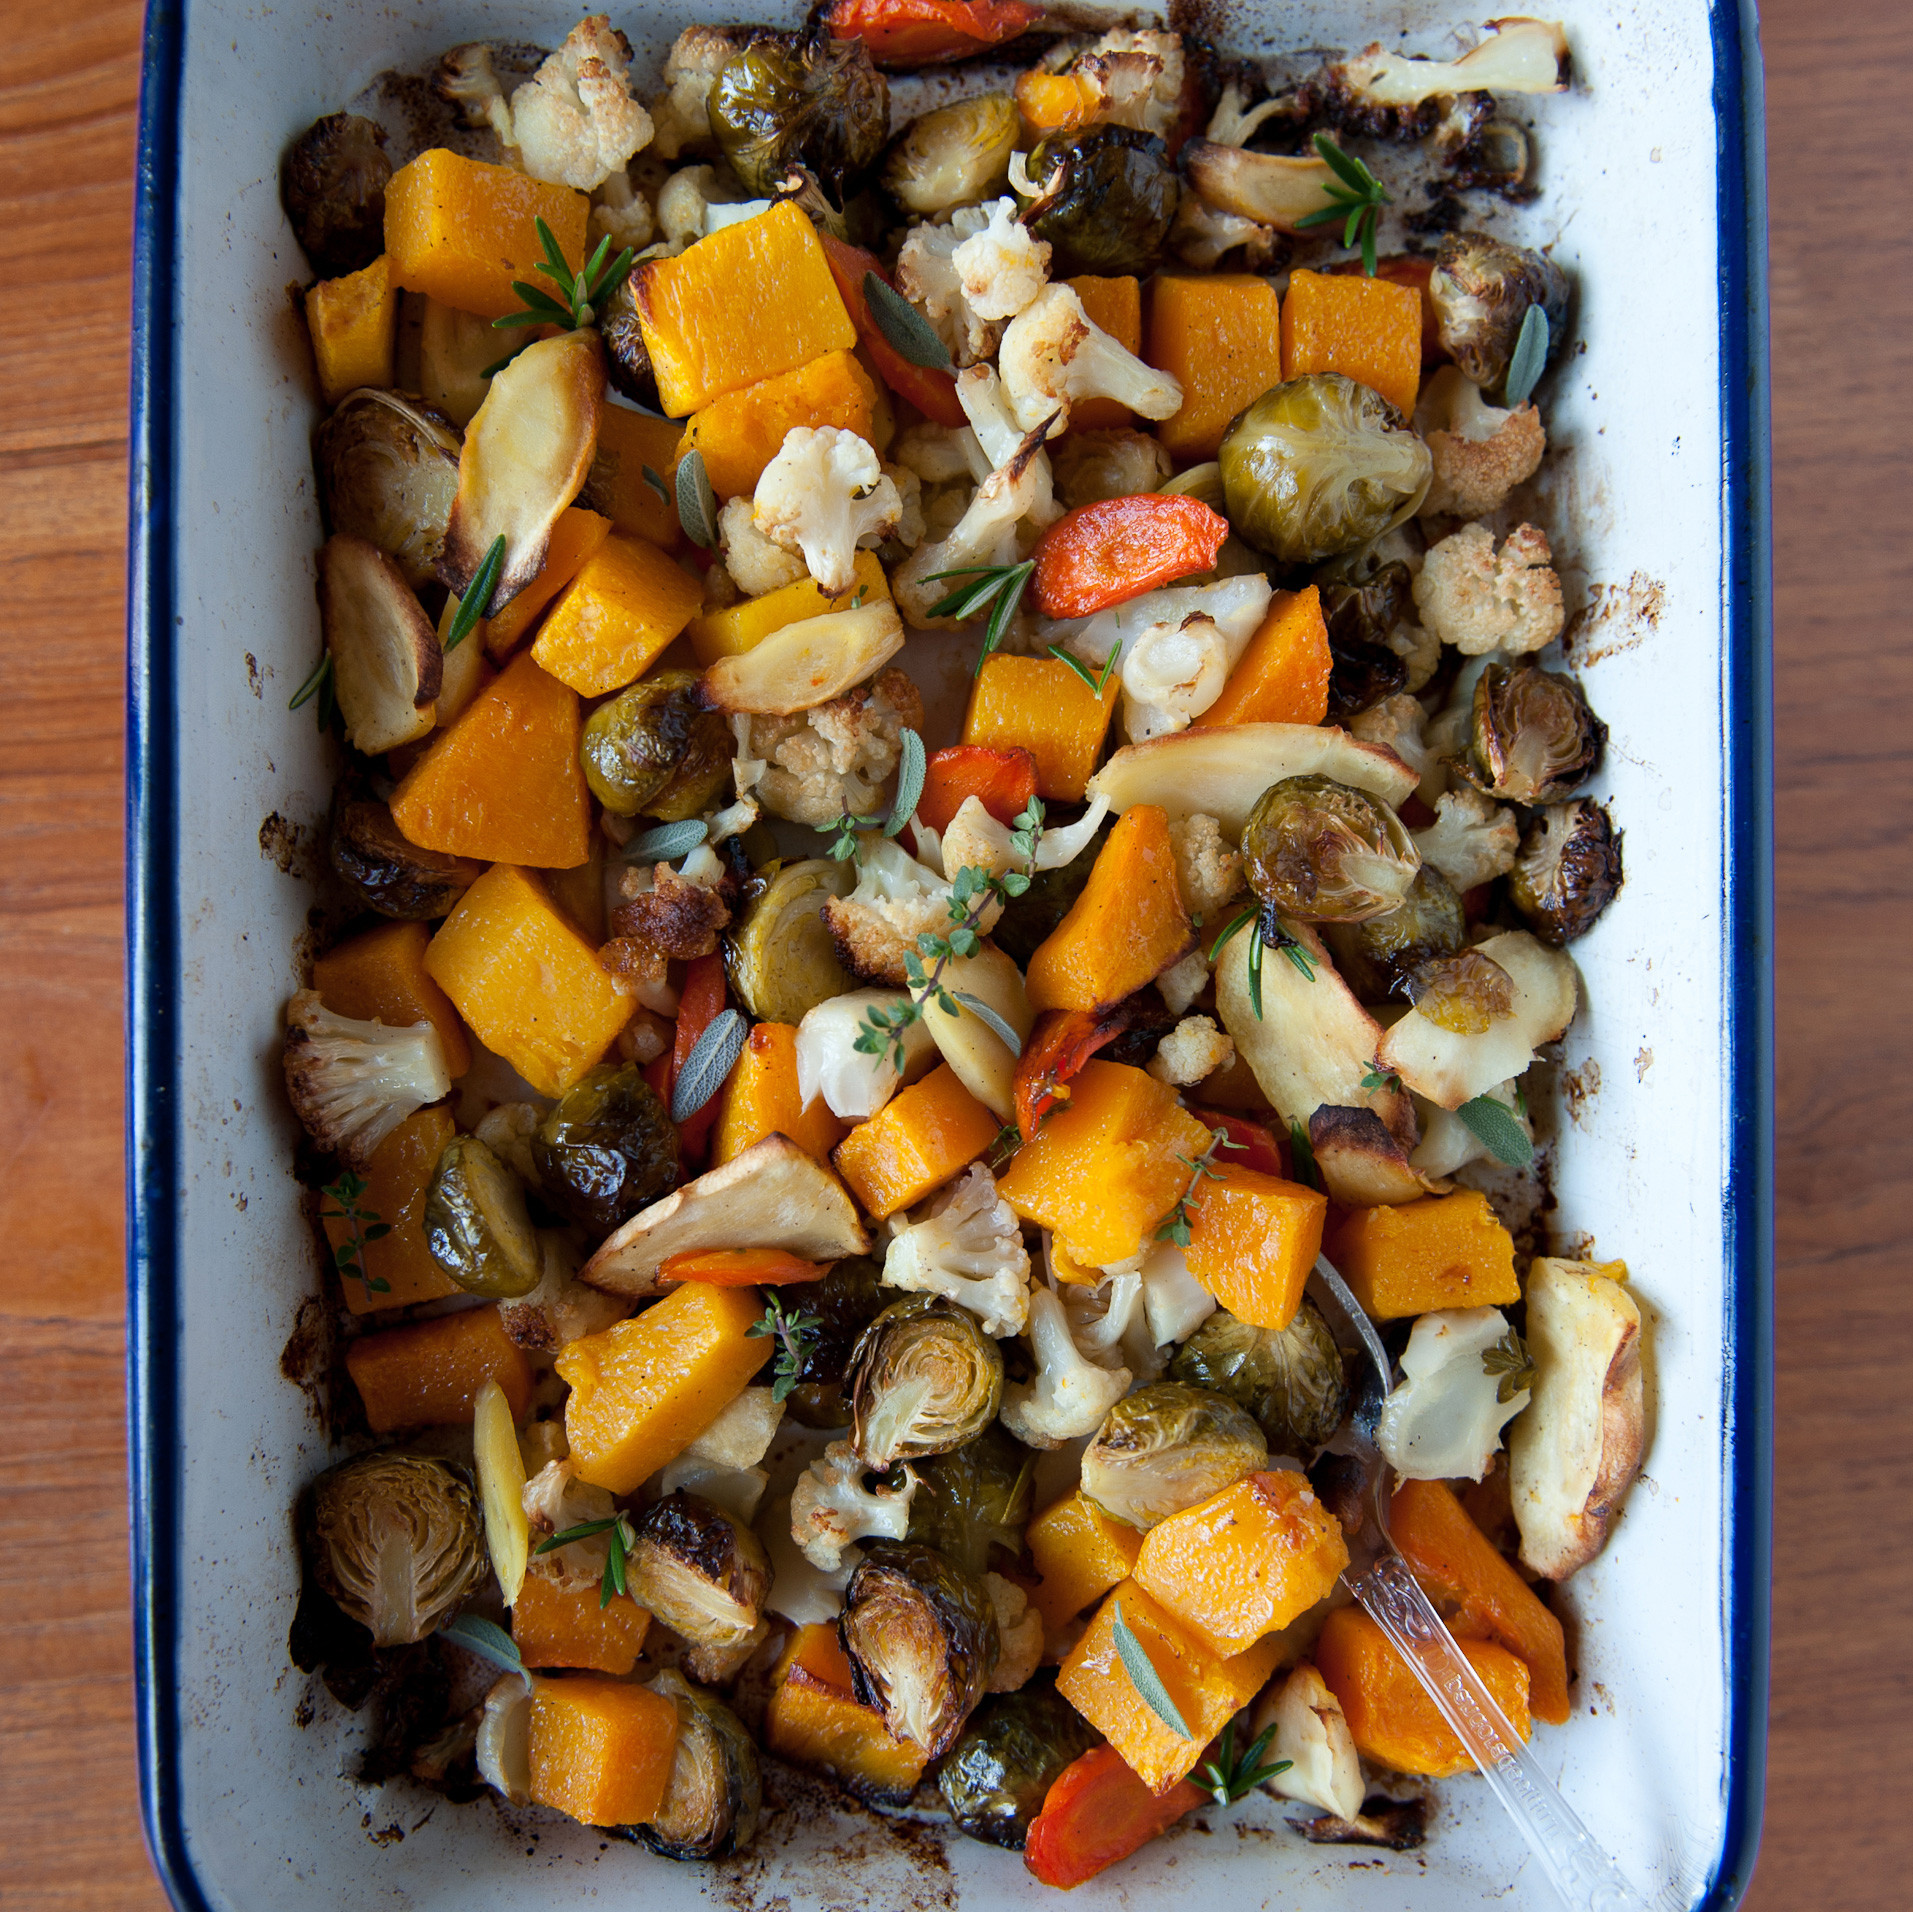 Roasted Vegetables Thanksgiving Recipe
 Roasted Ve ables with Fresh Herbs Recipe Melissa Rubel